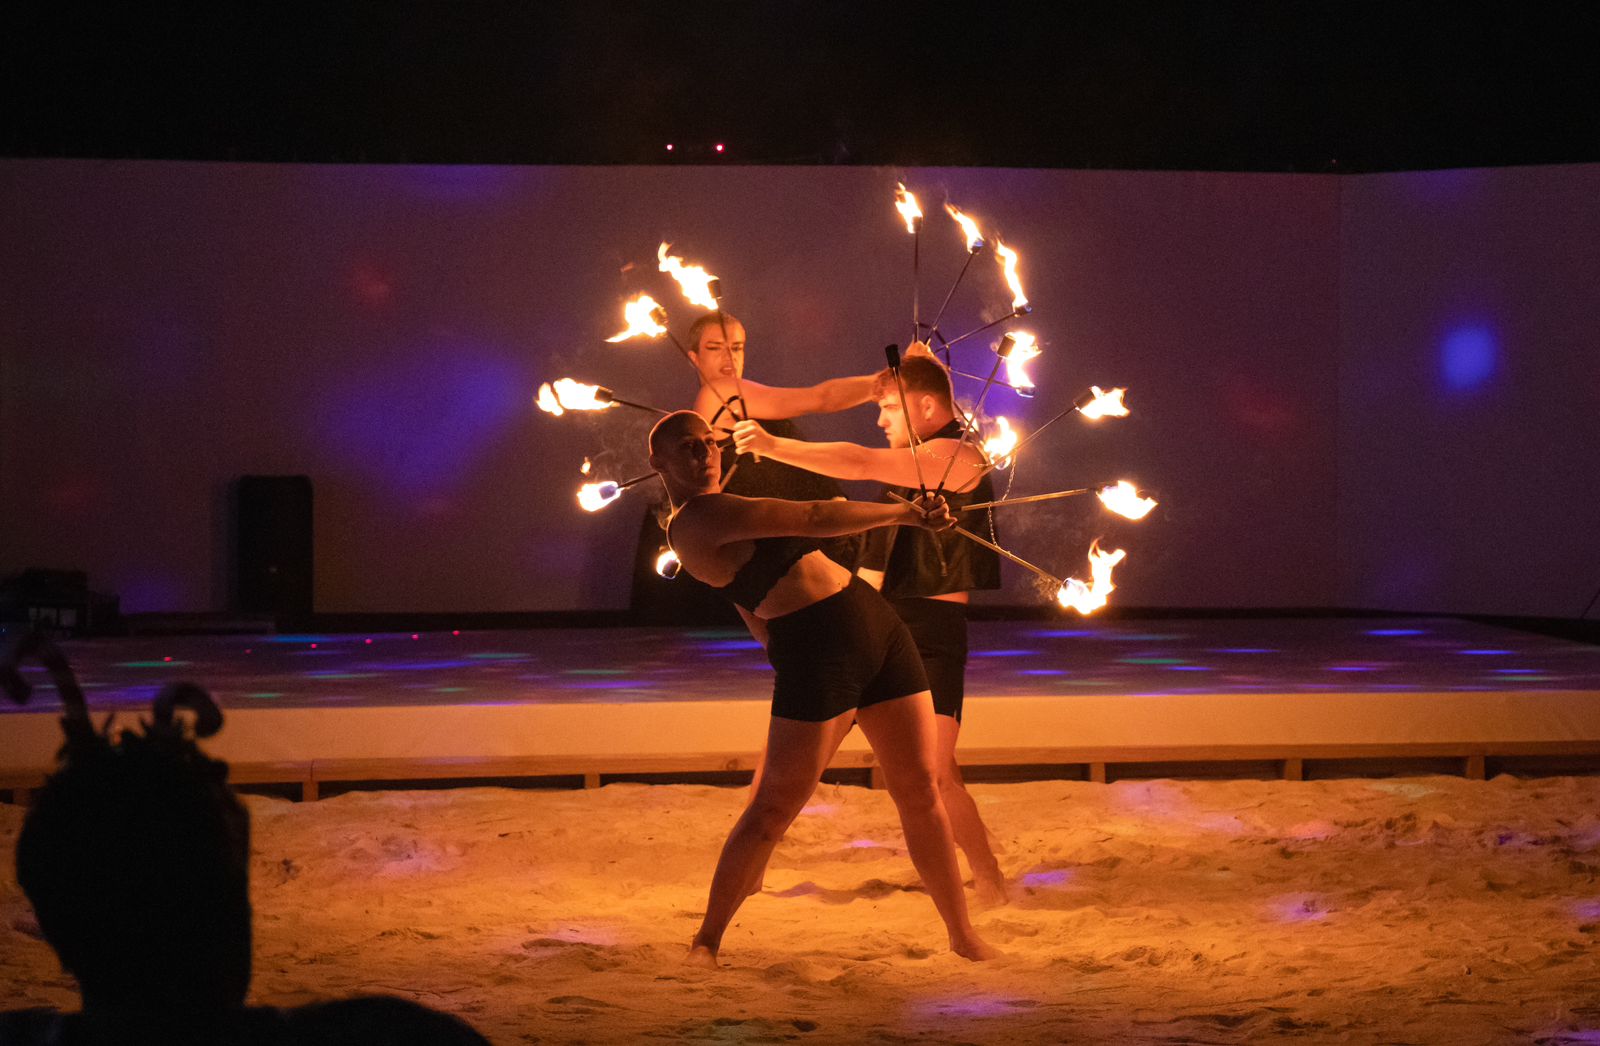 Fire performers